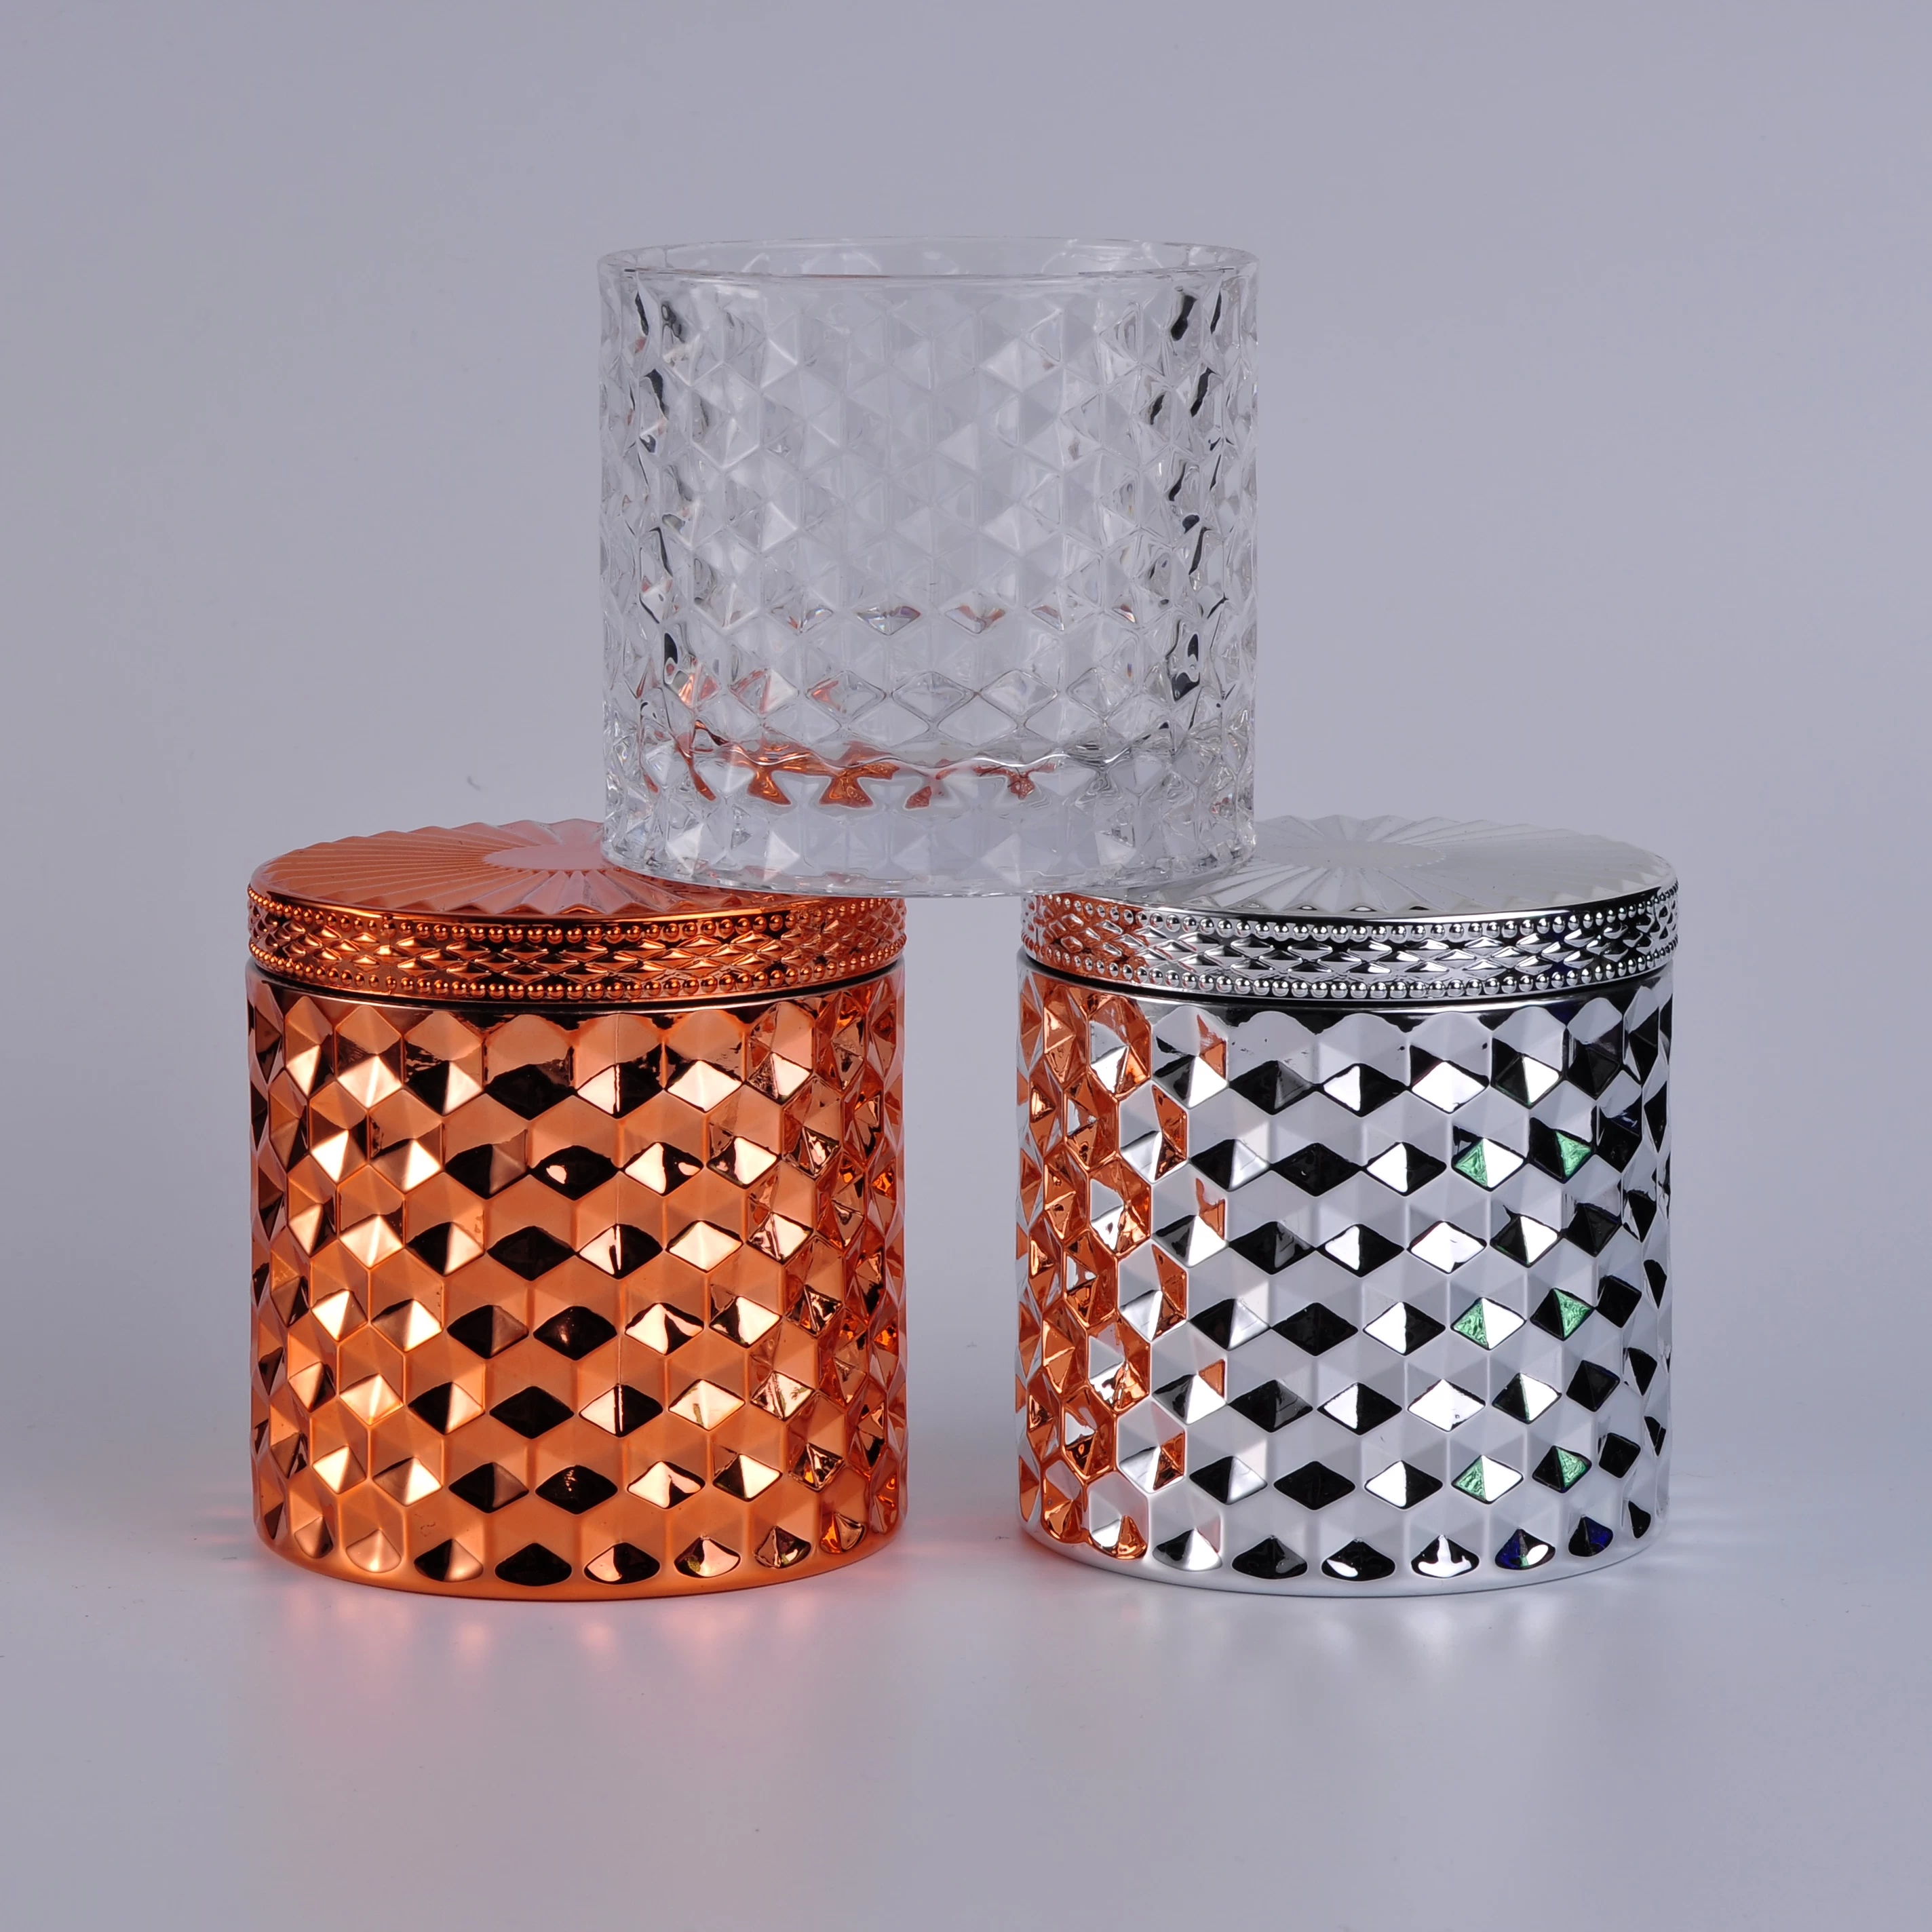 embossed woven pattern glass candle holders from Sunny Glassware